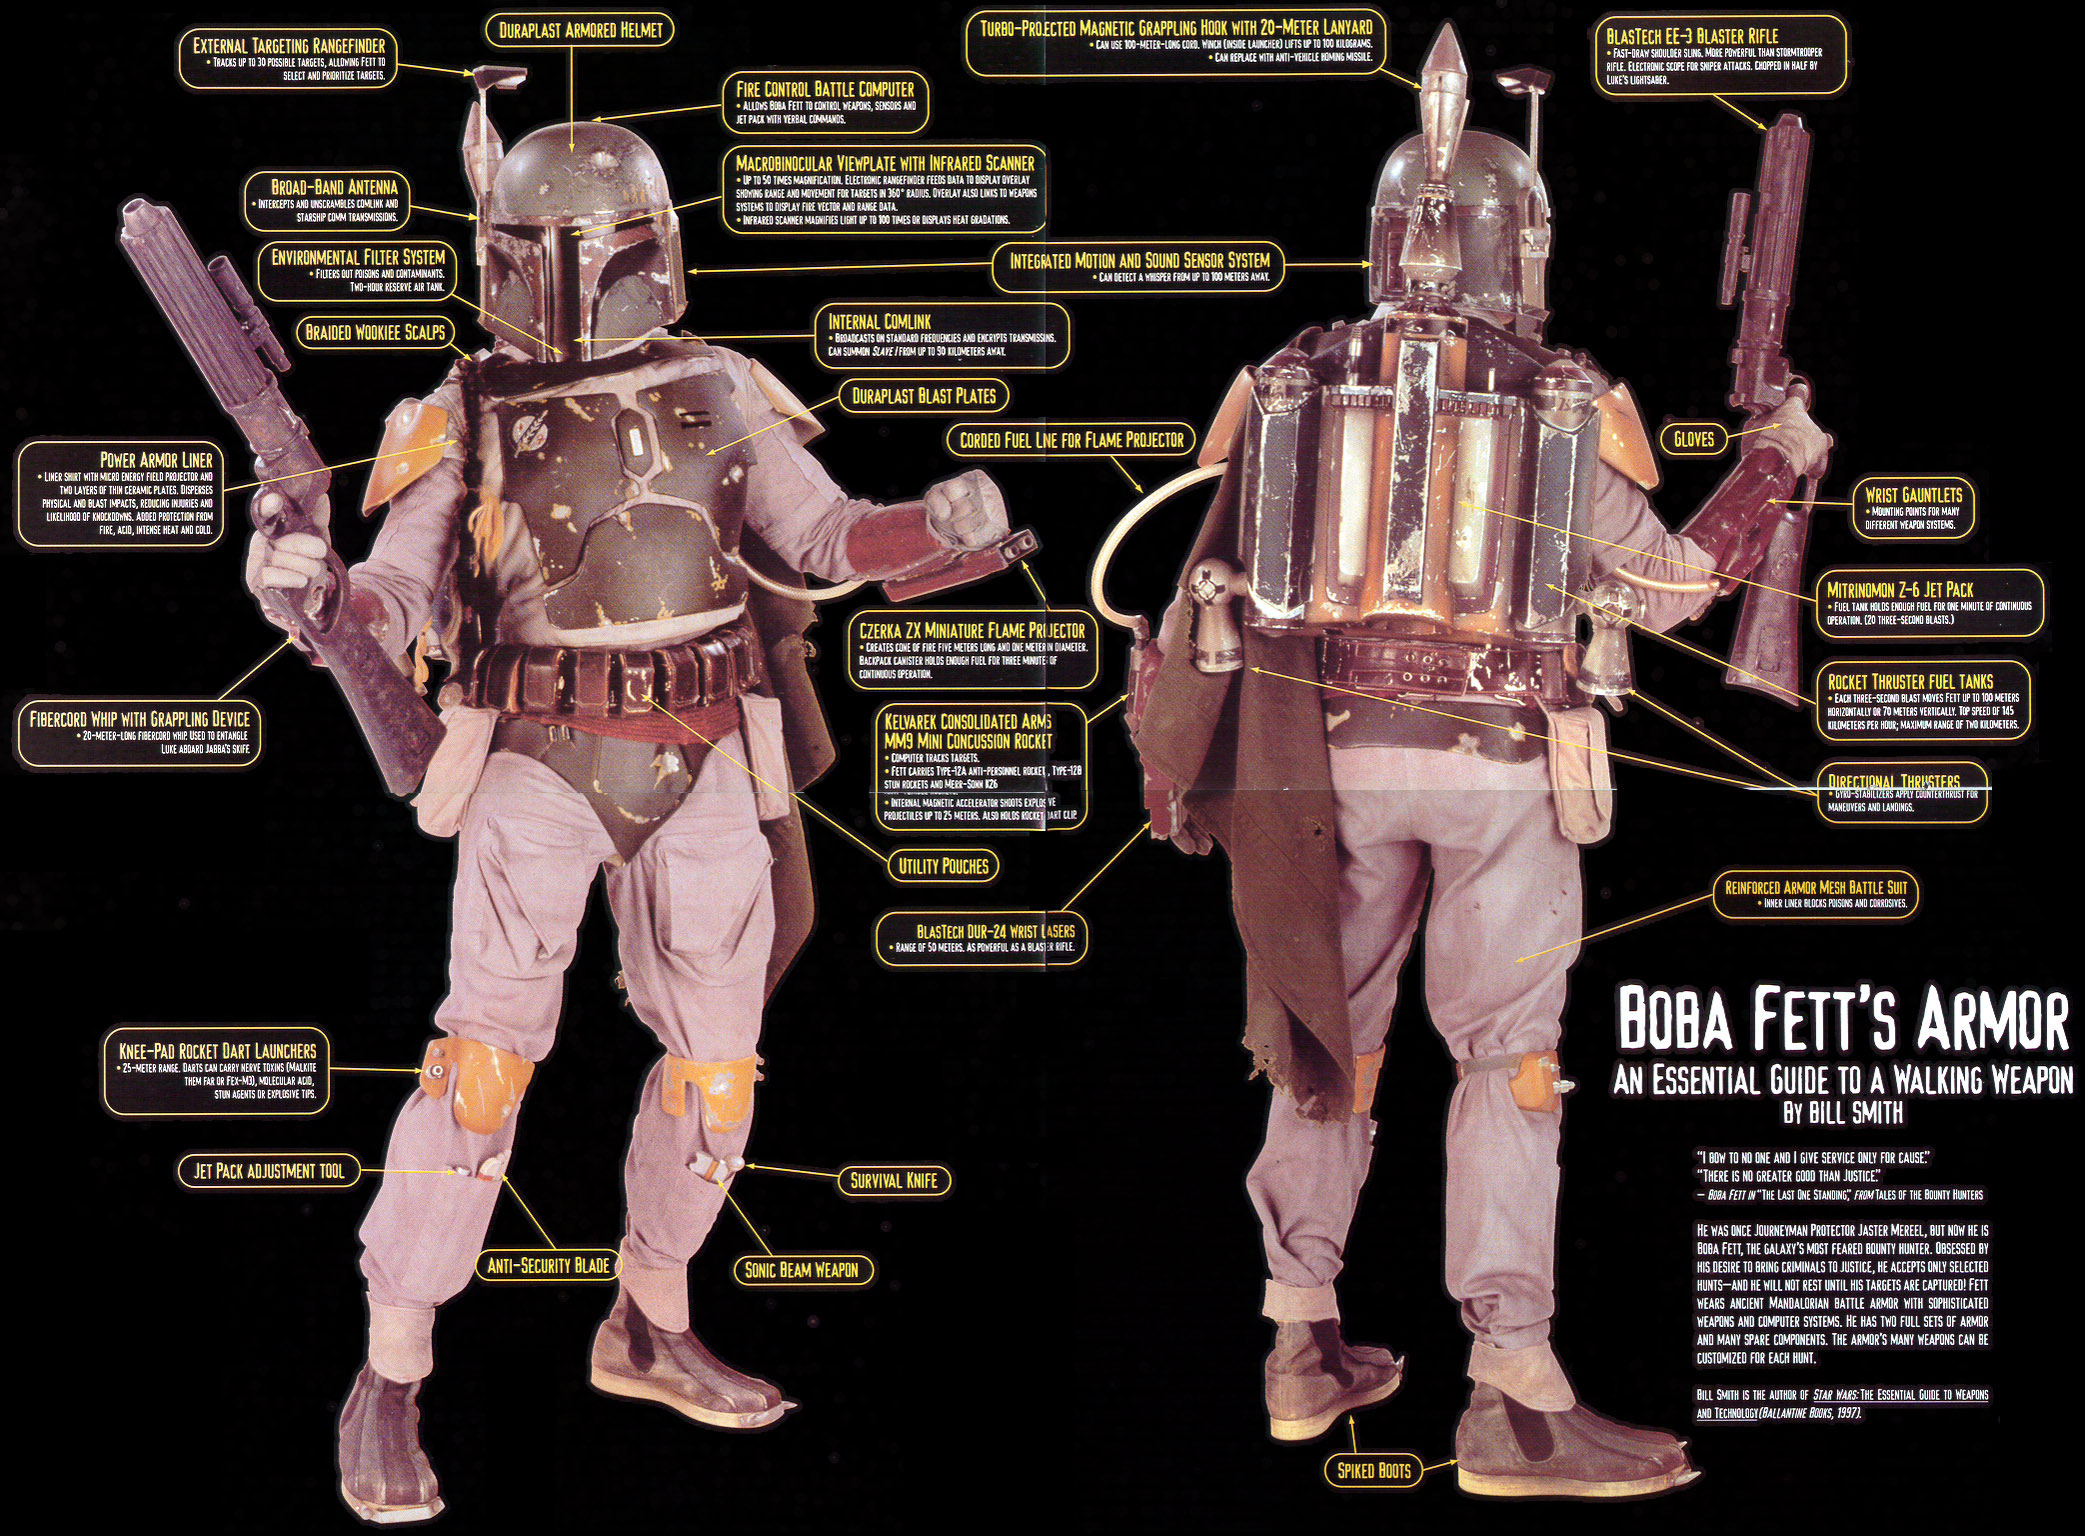 "Boba Fett's Armor - An Essential Guide to a Walking Weapon" by Bill